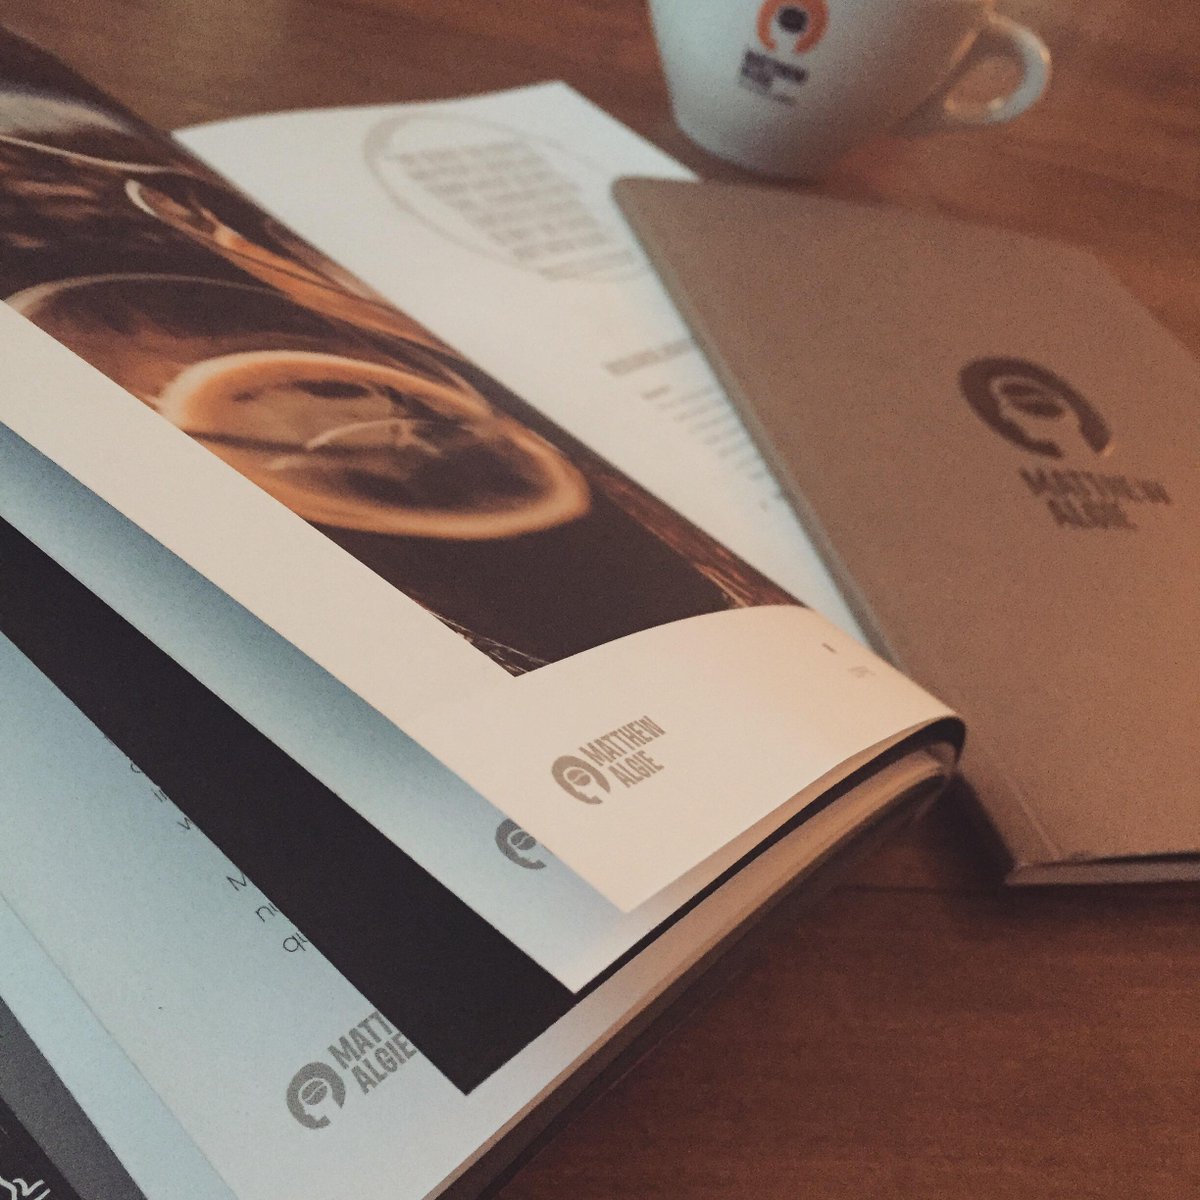 Need to grab a copy of our updated brochure? Contact us here! > matthewalgie.com/contact/ #matthewalgie #exceptionalcoffee